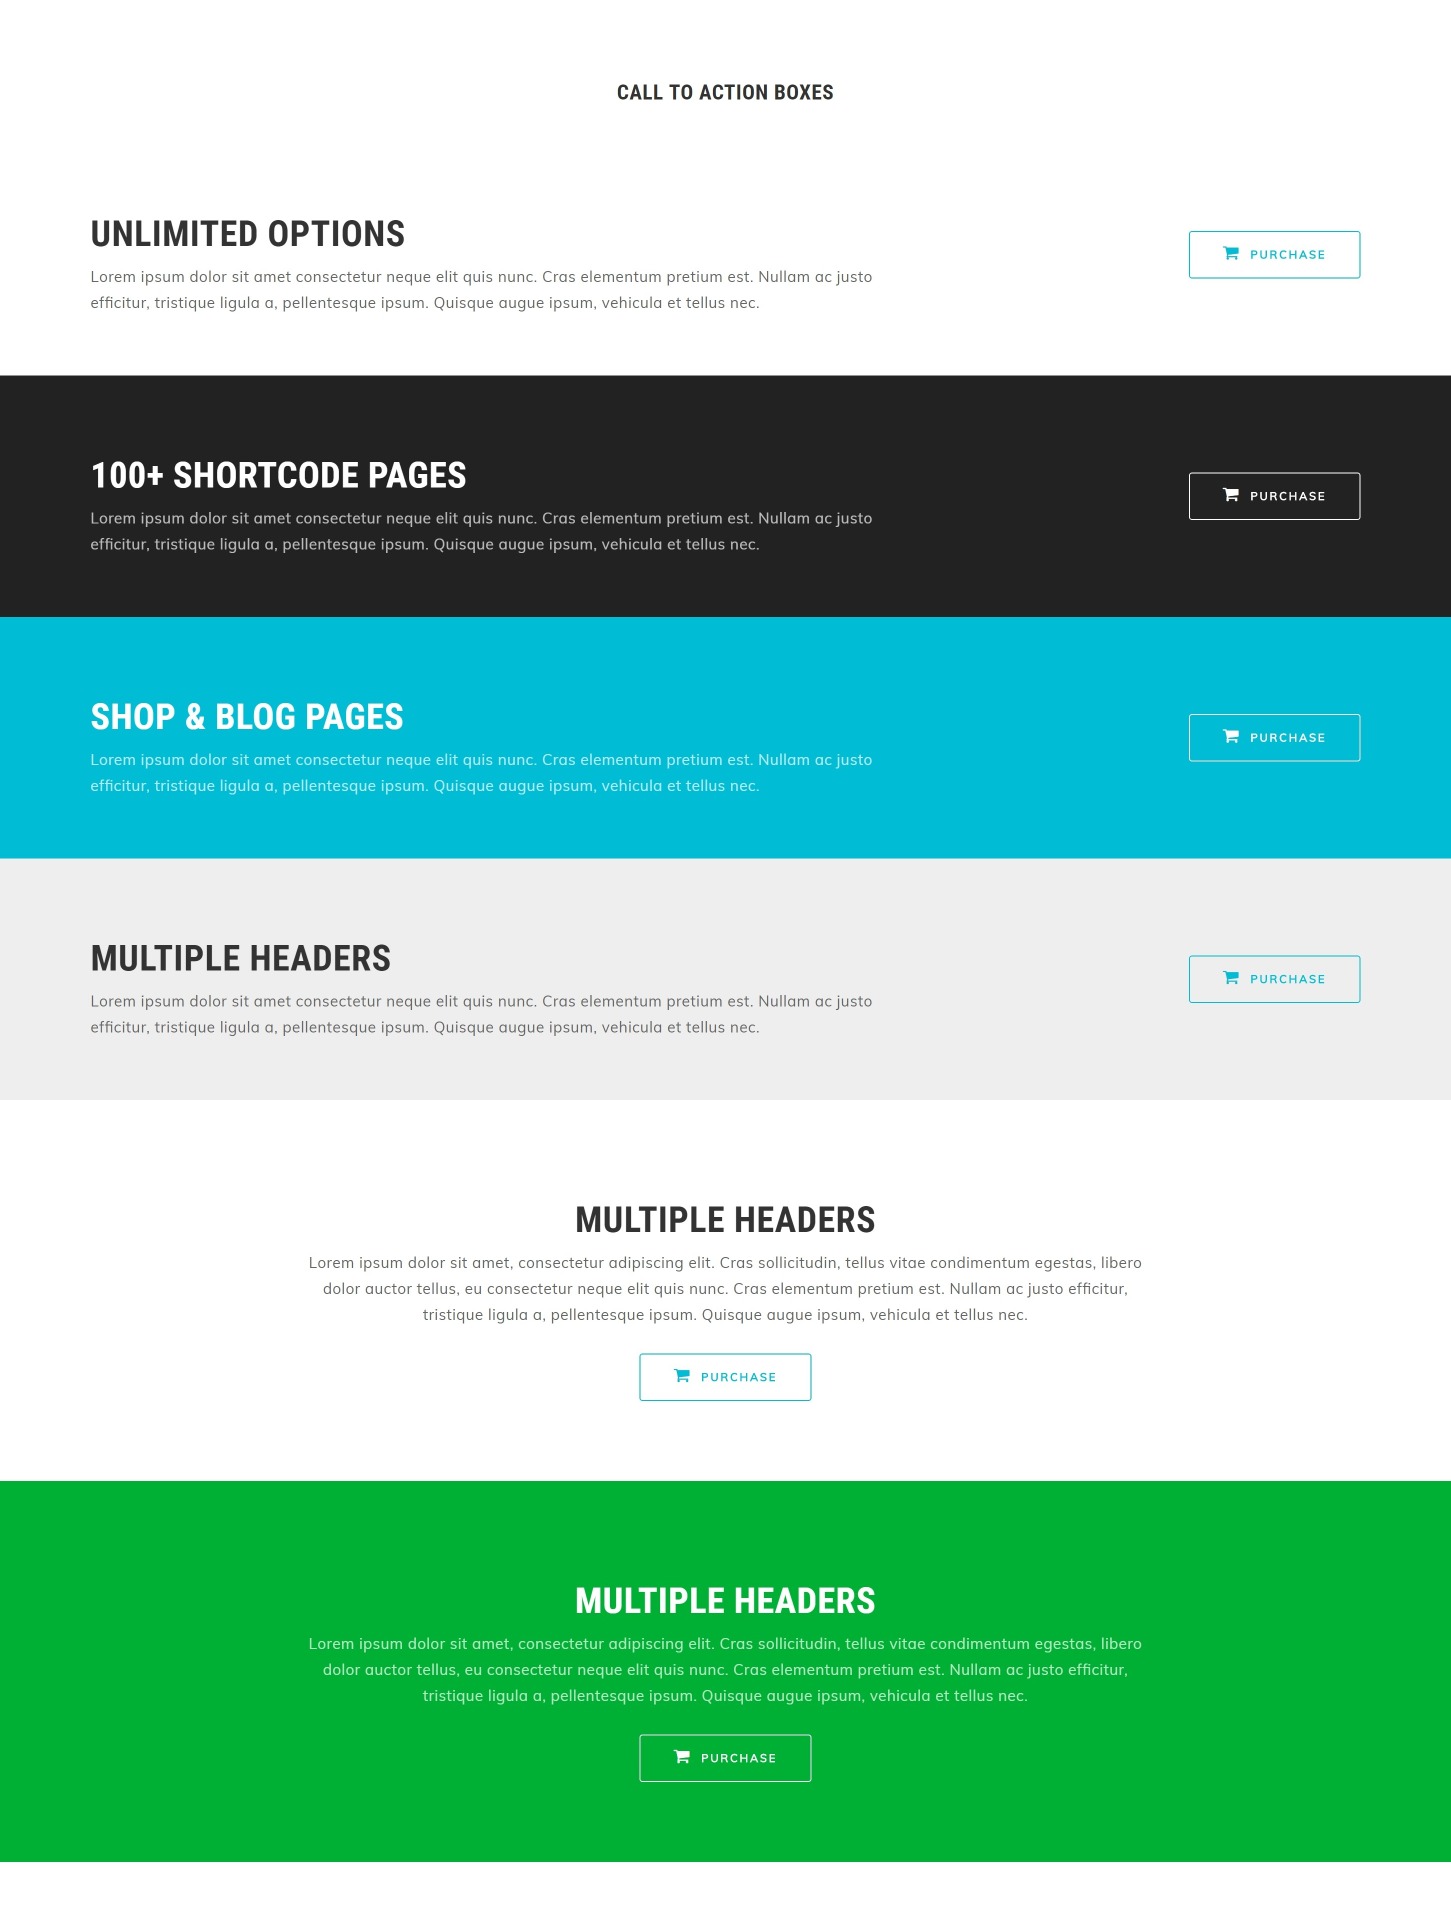 Solo - 103+ Pages HTML Bootstrap Template - 20